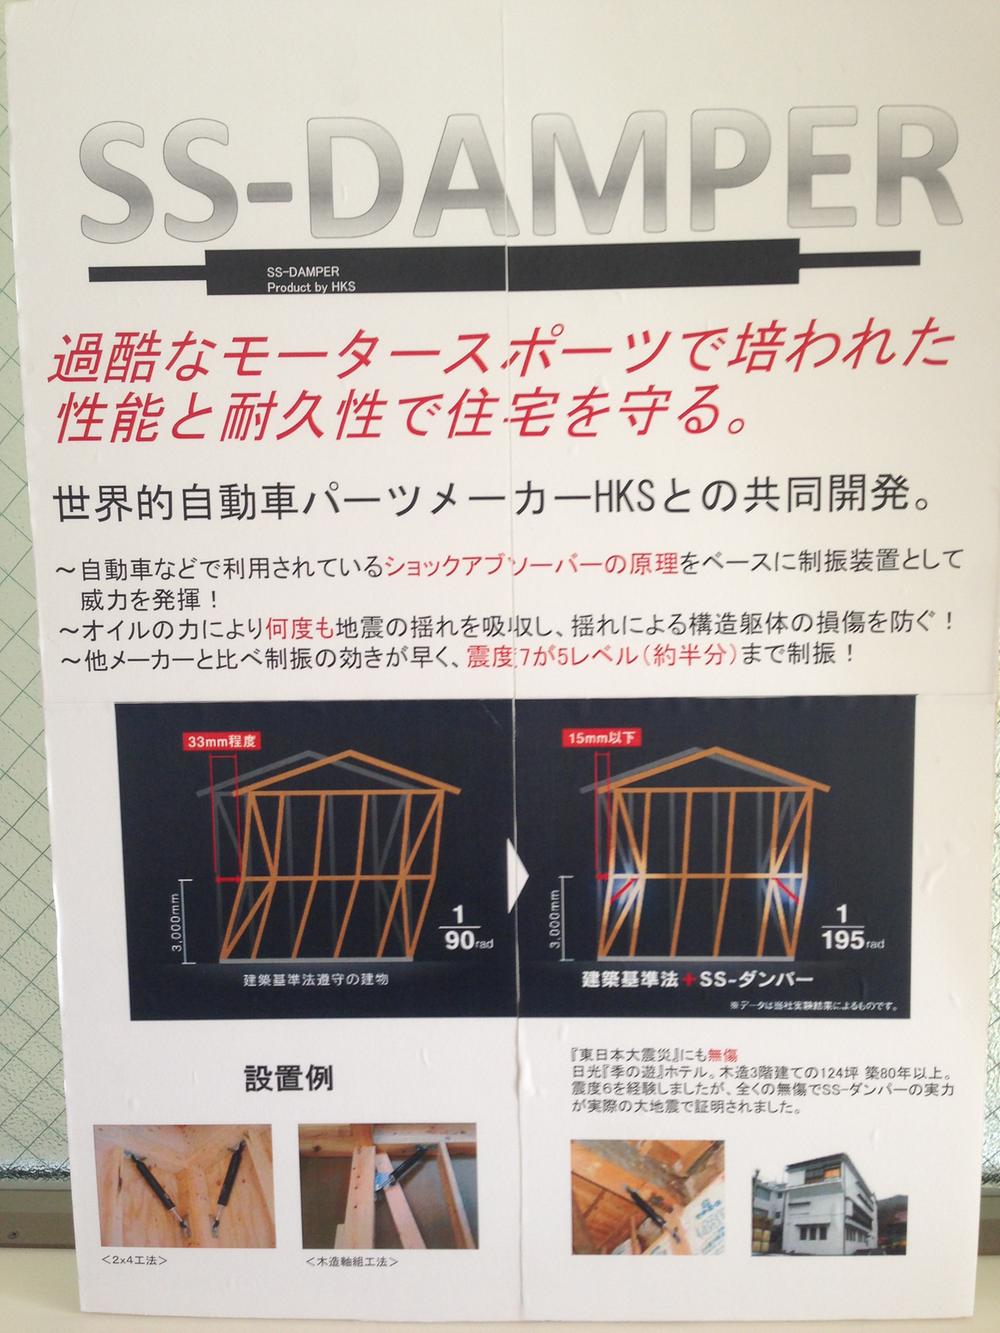 Construction ・ Construction method ・ specification. 2 × 4 construction method further with vibration dampers strong earthquake